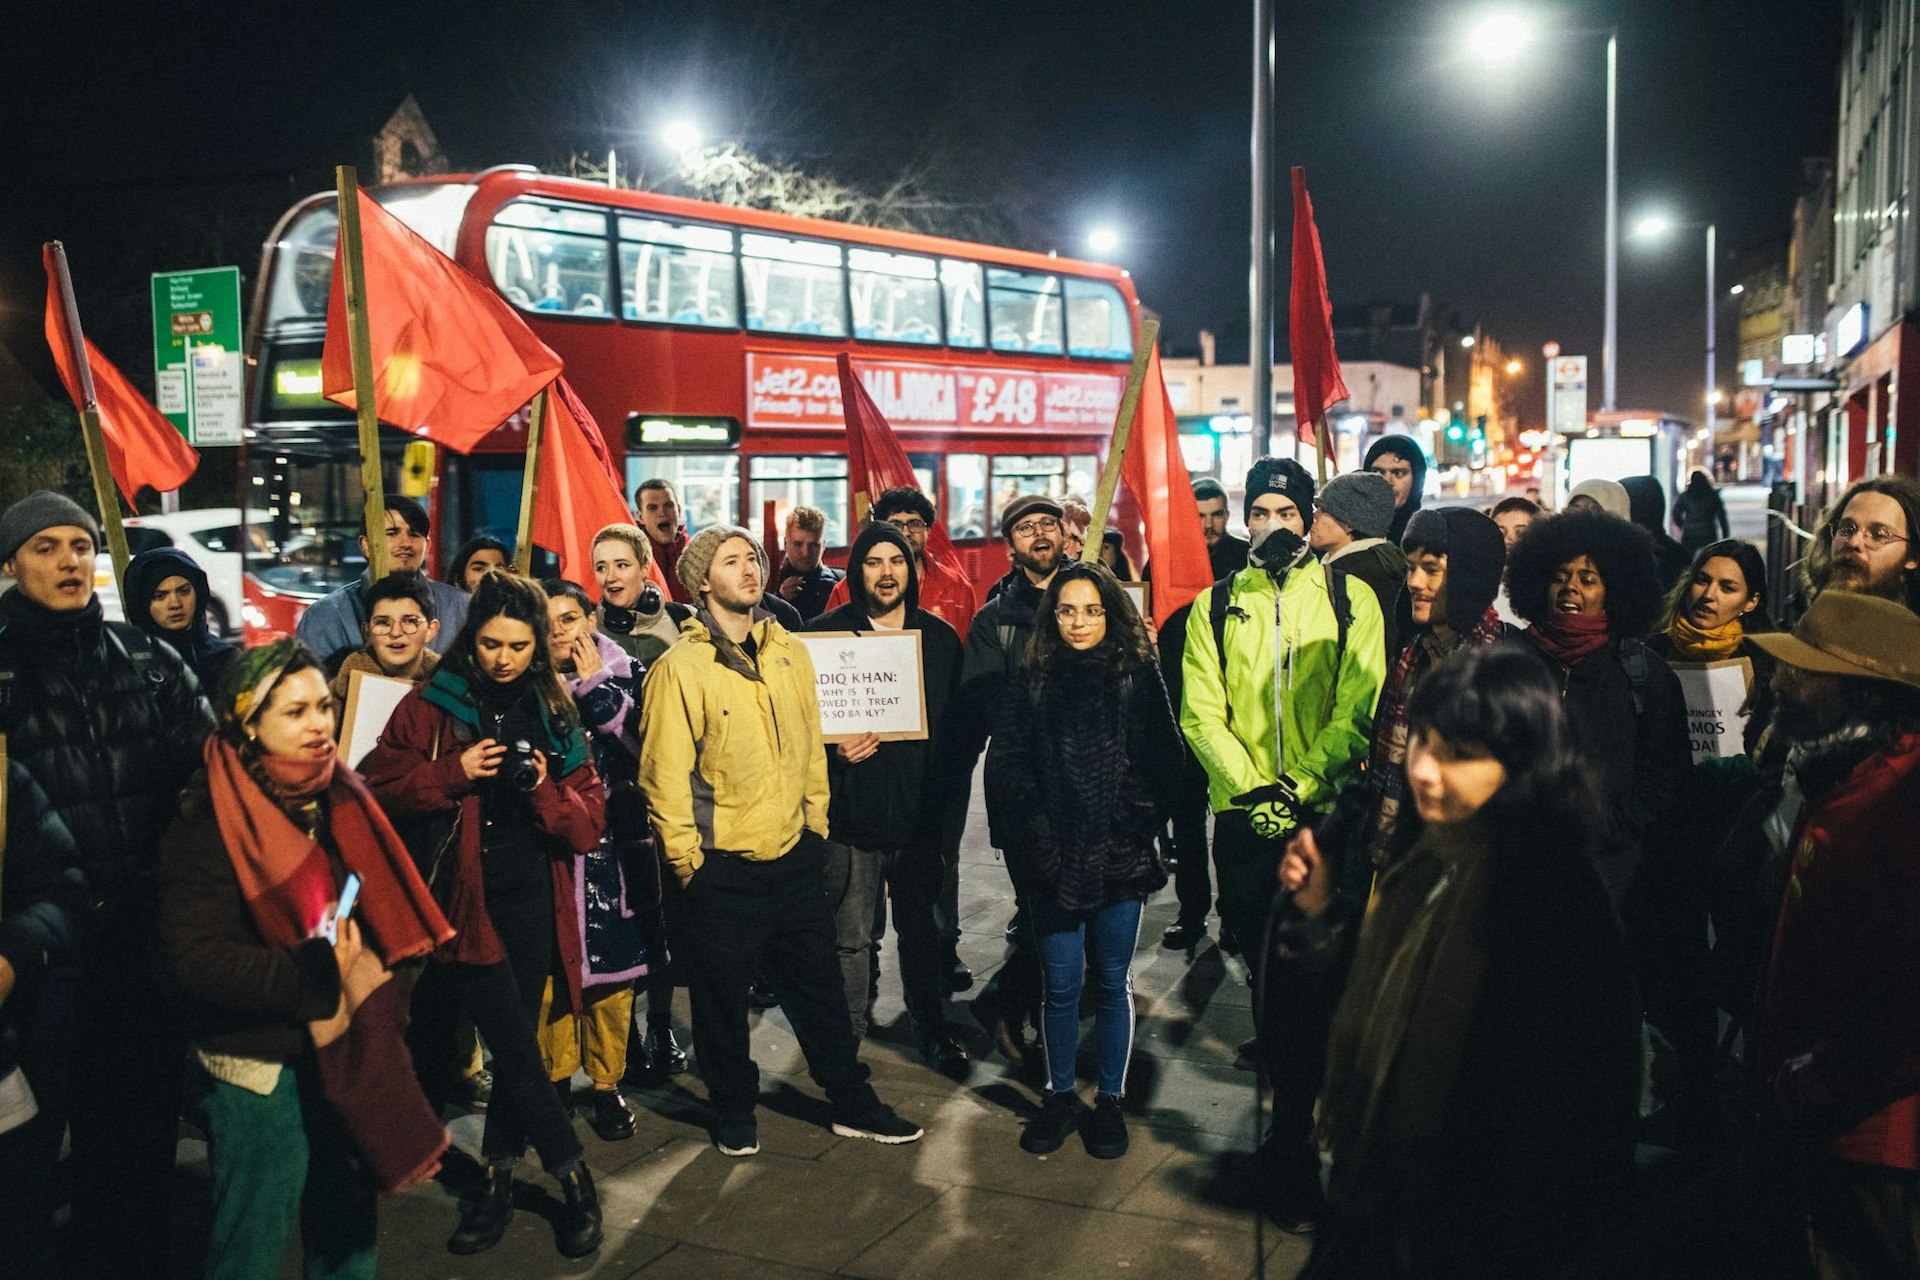 The fight to save Latin Village is a fight for London’s soul